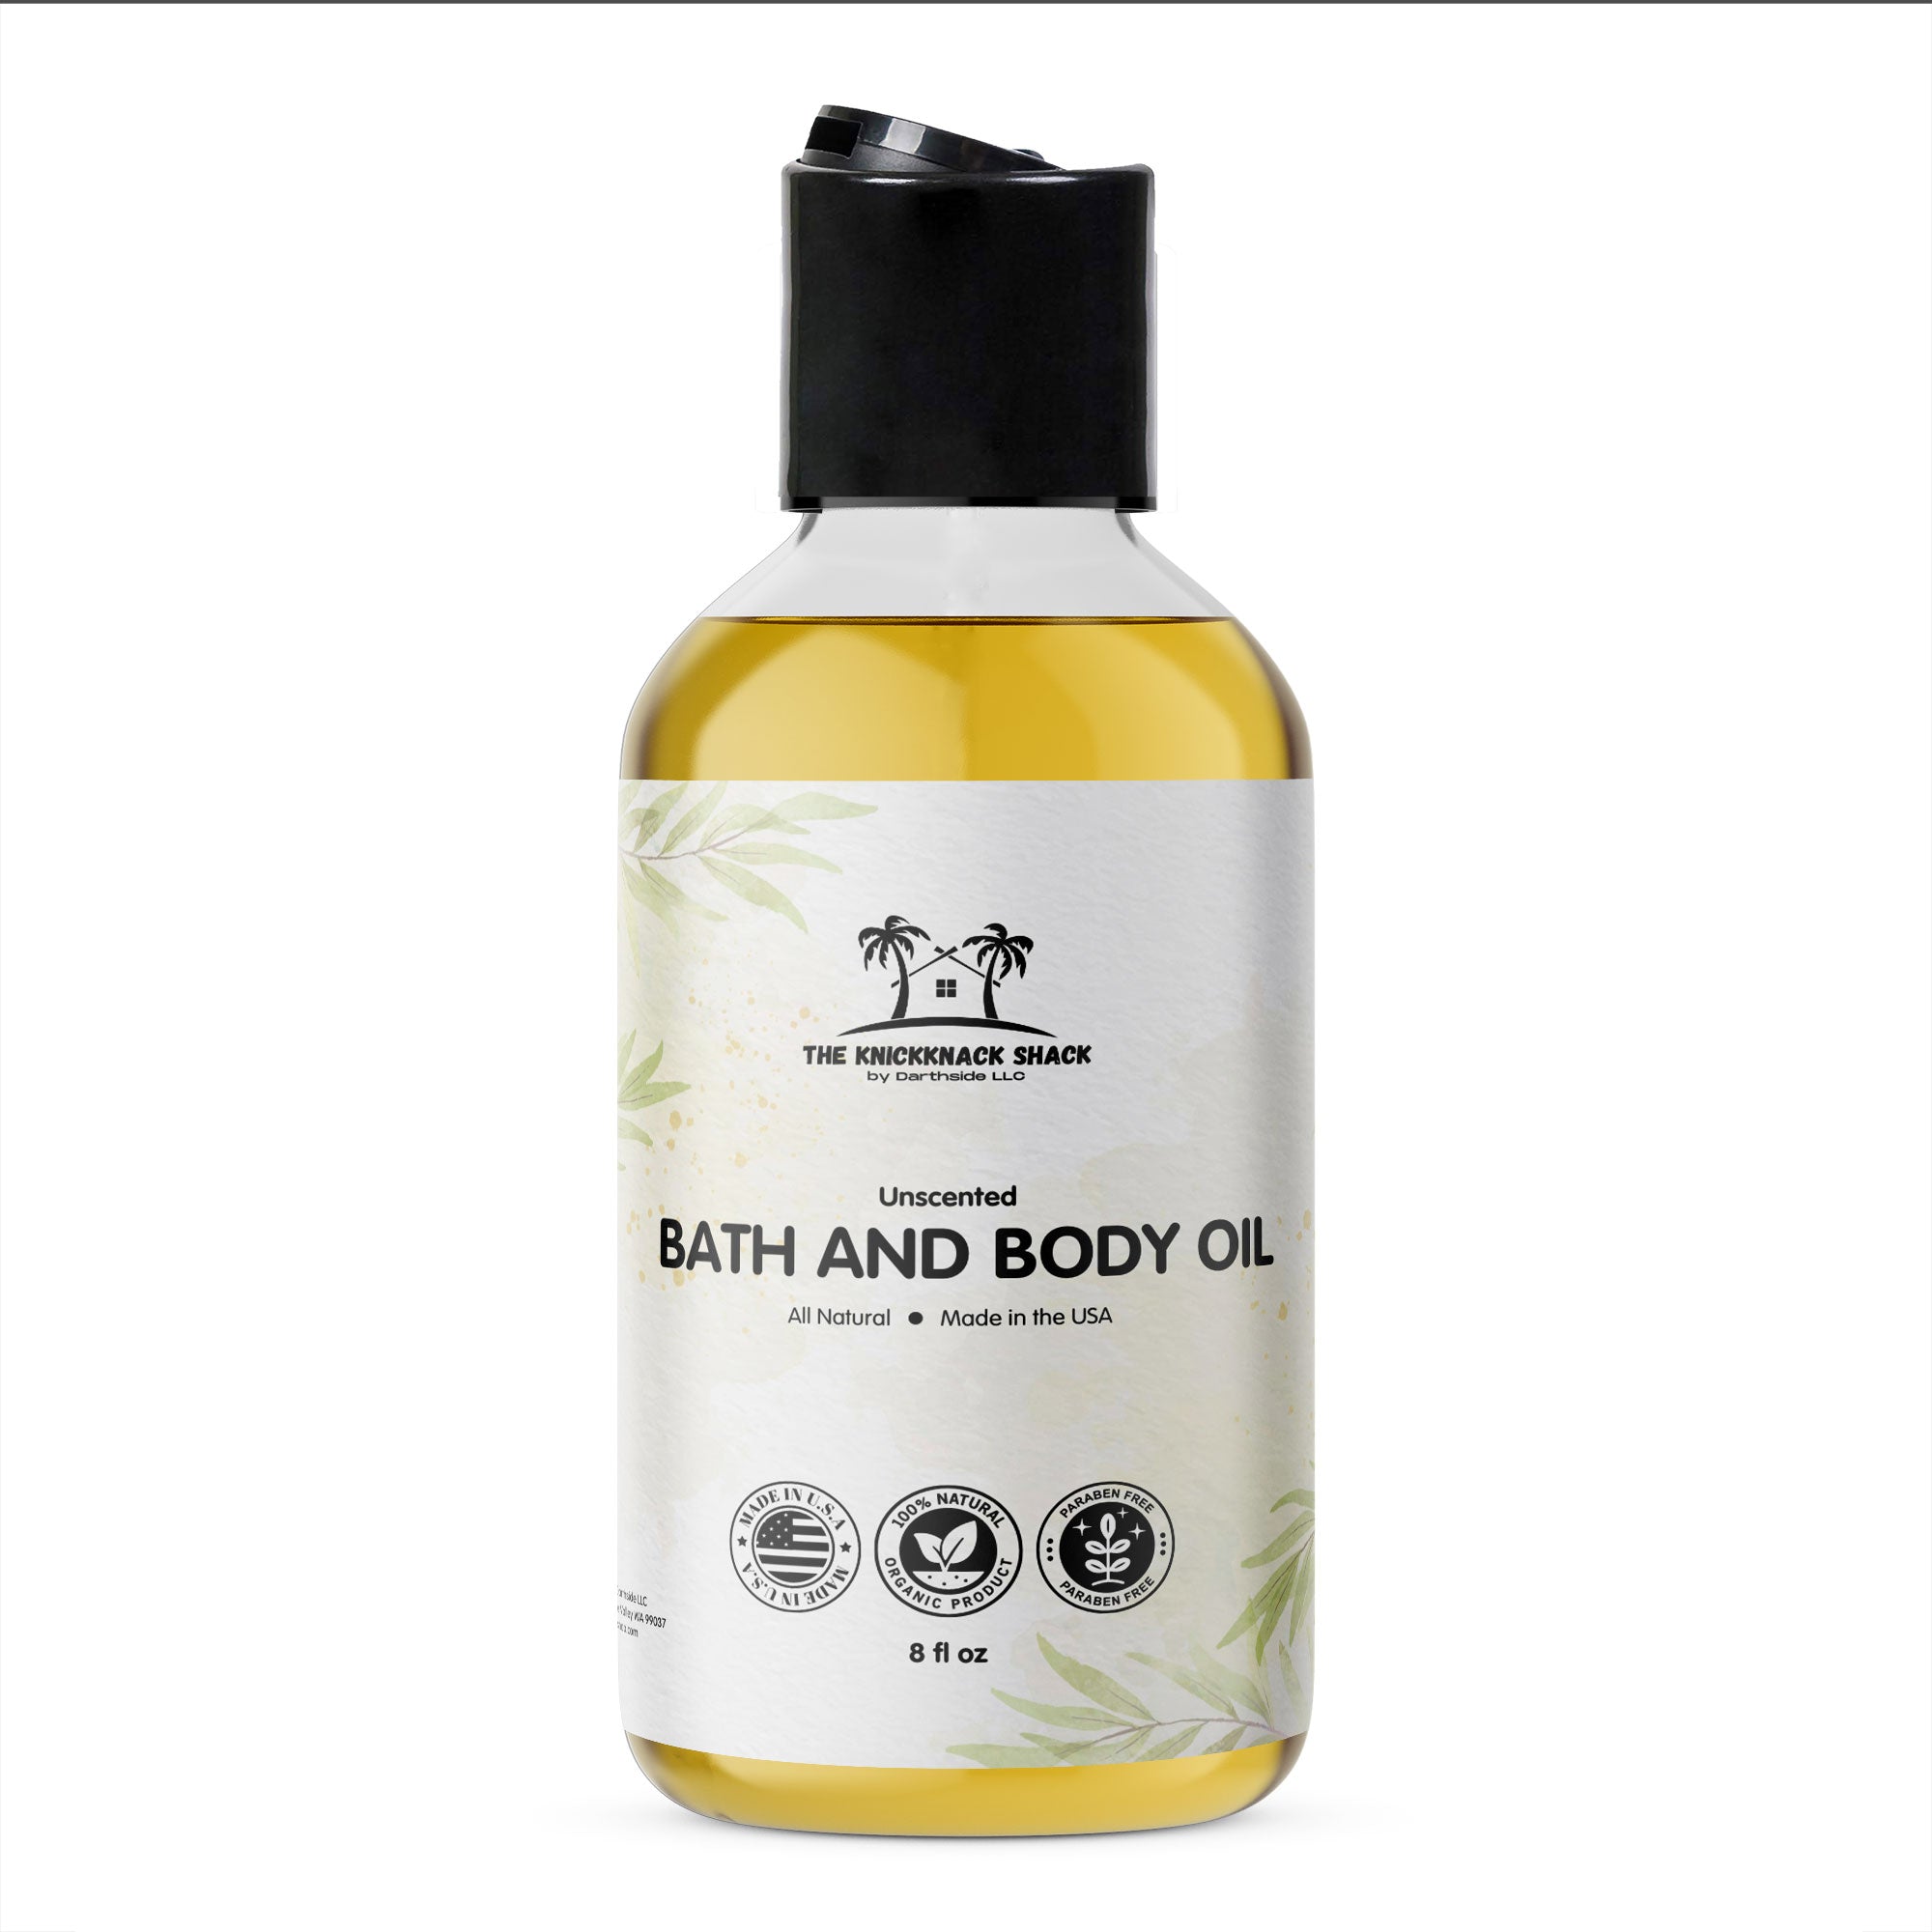 Unscented Bath and Body Oil